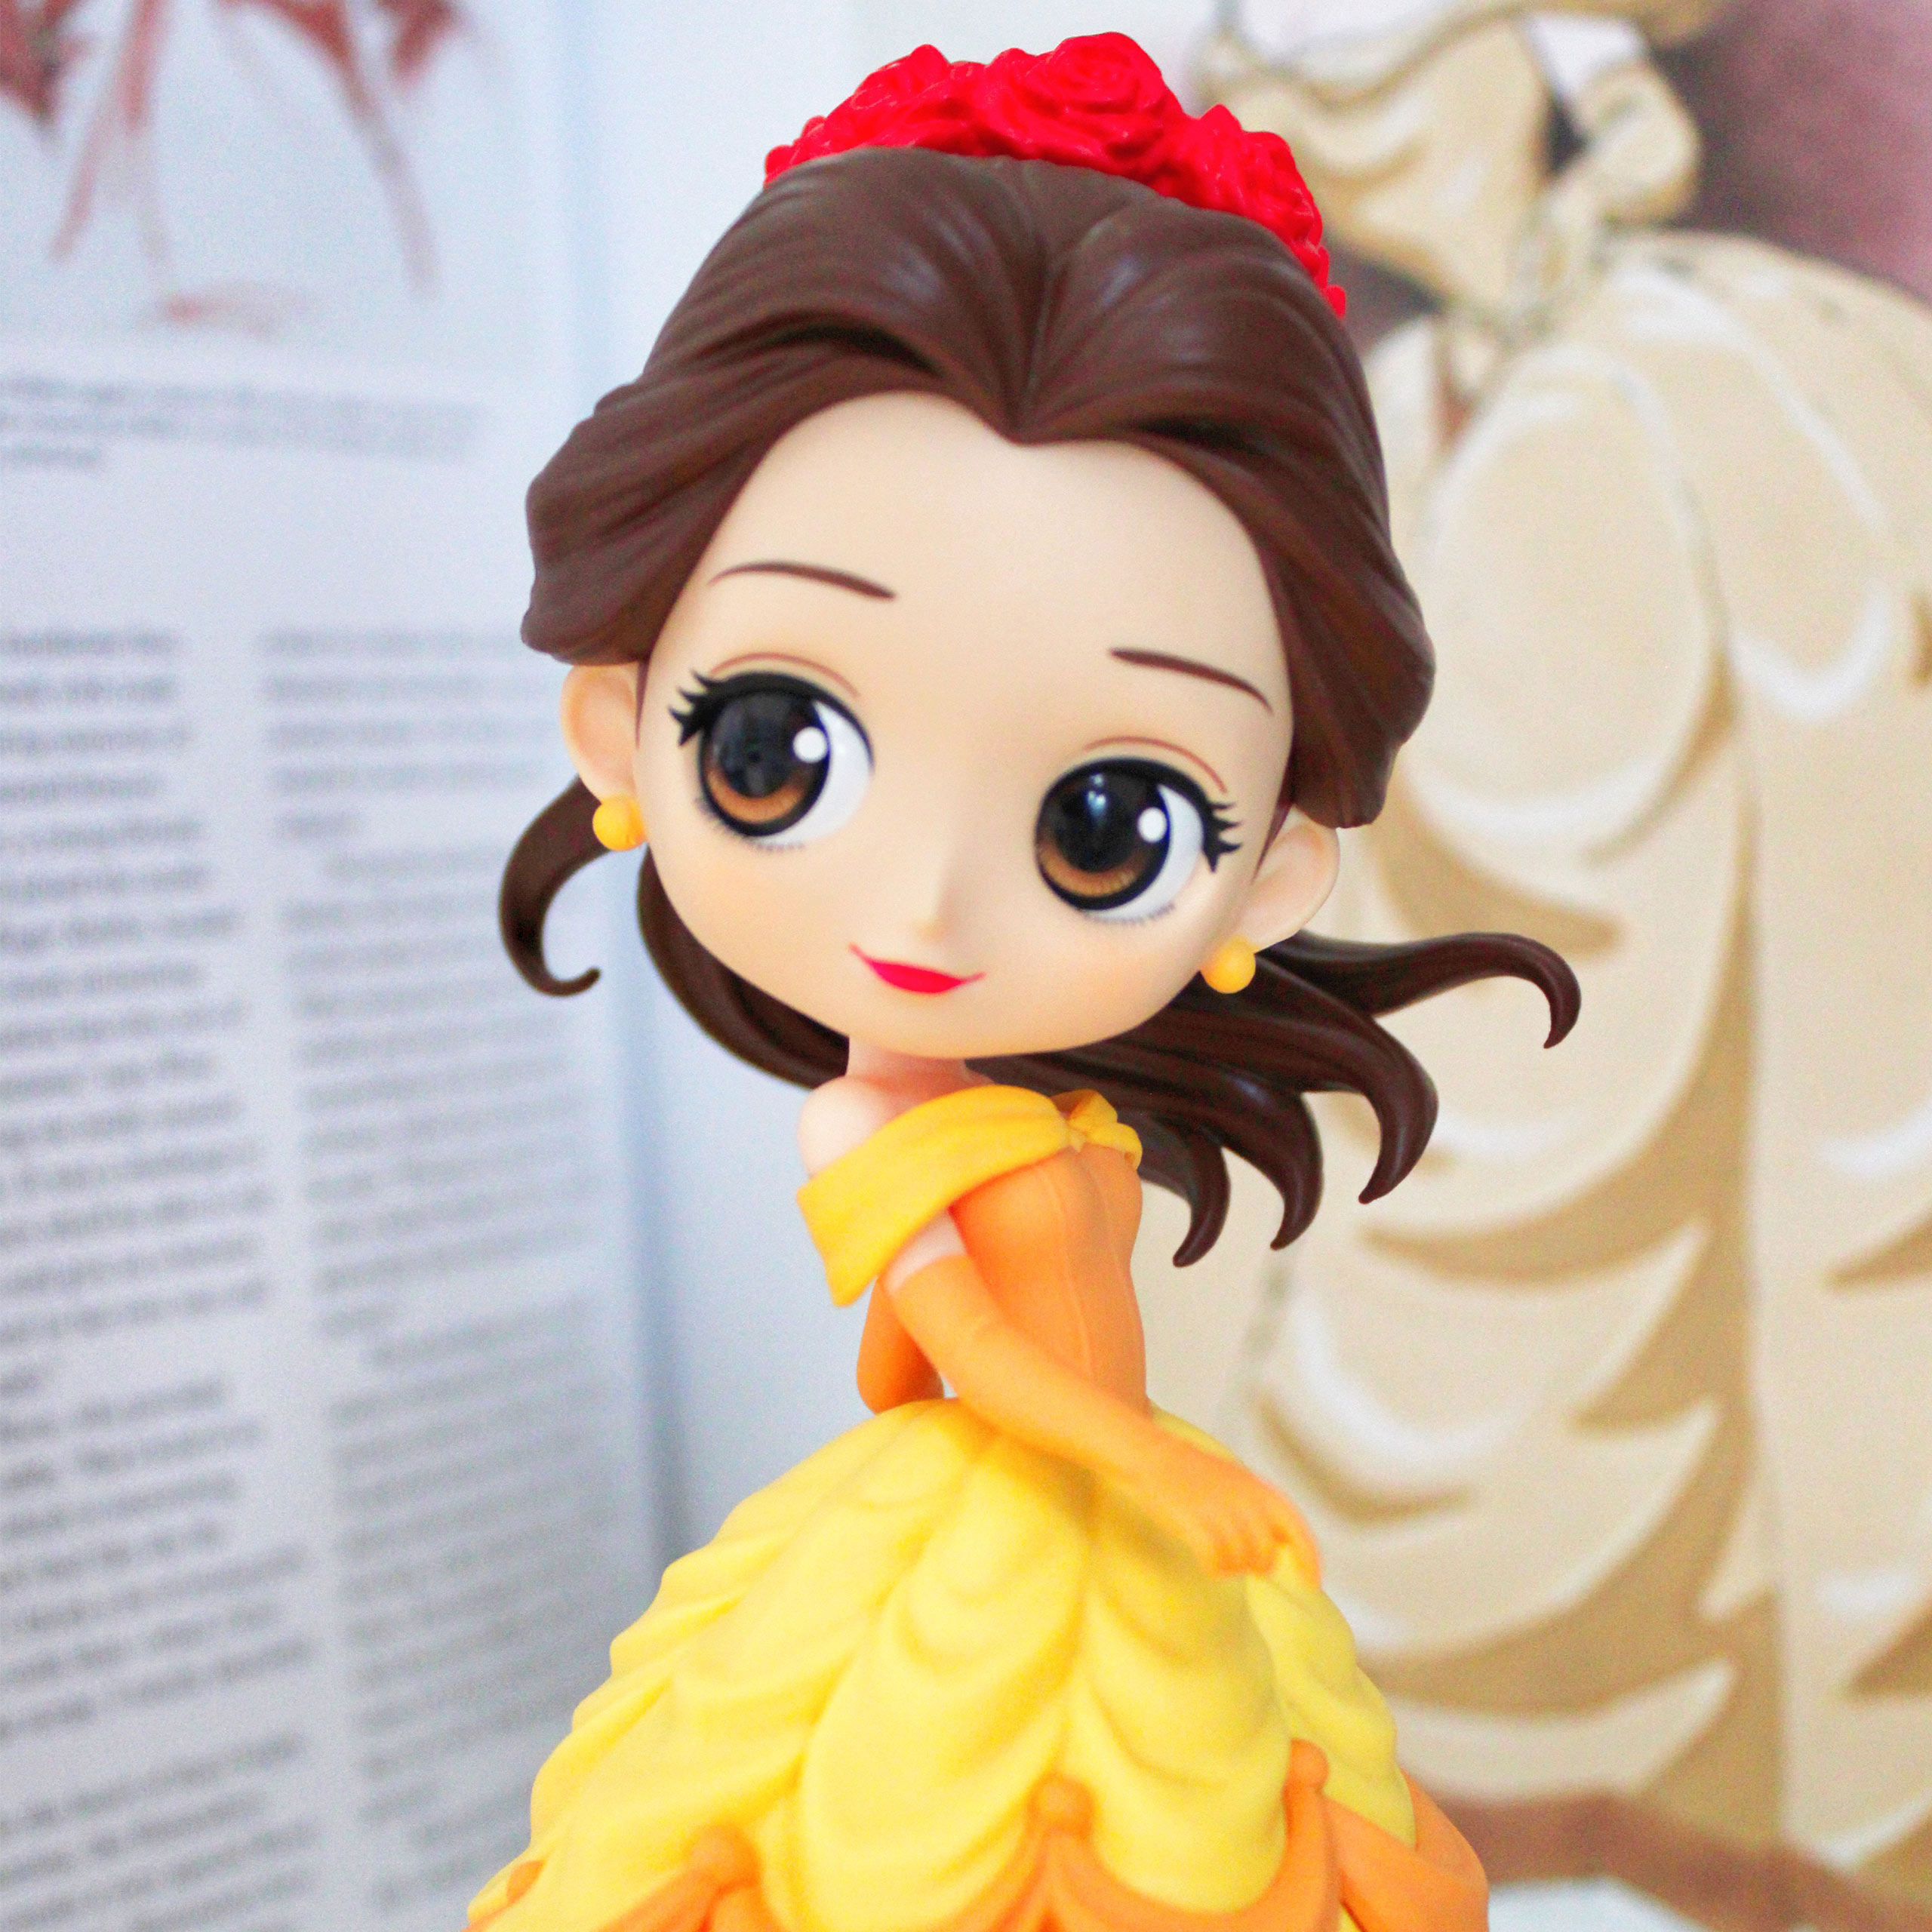 Beauty and the Beast - Belle Q Posket Figure